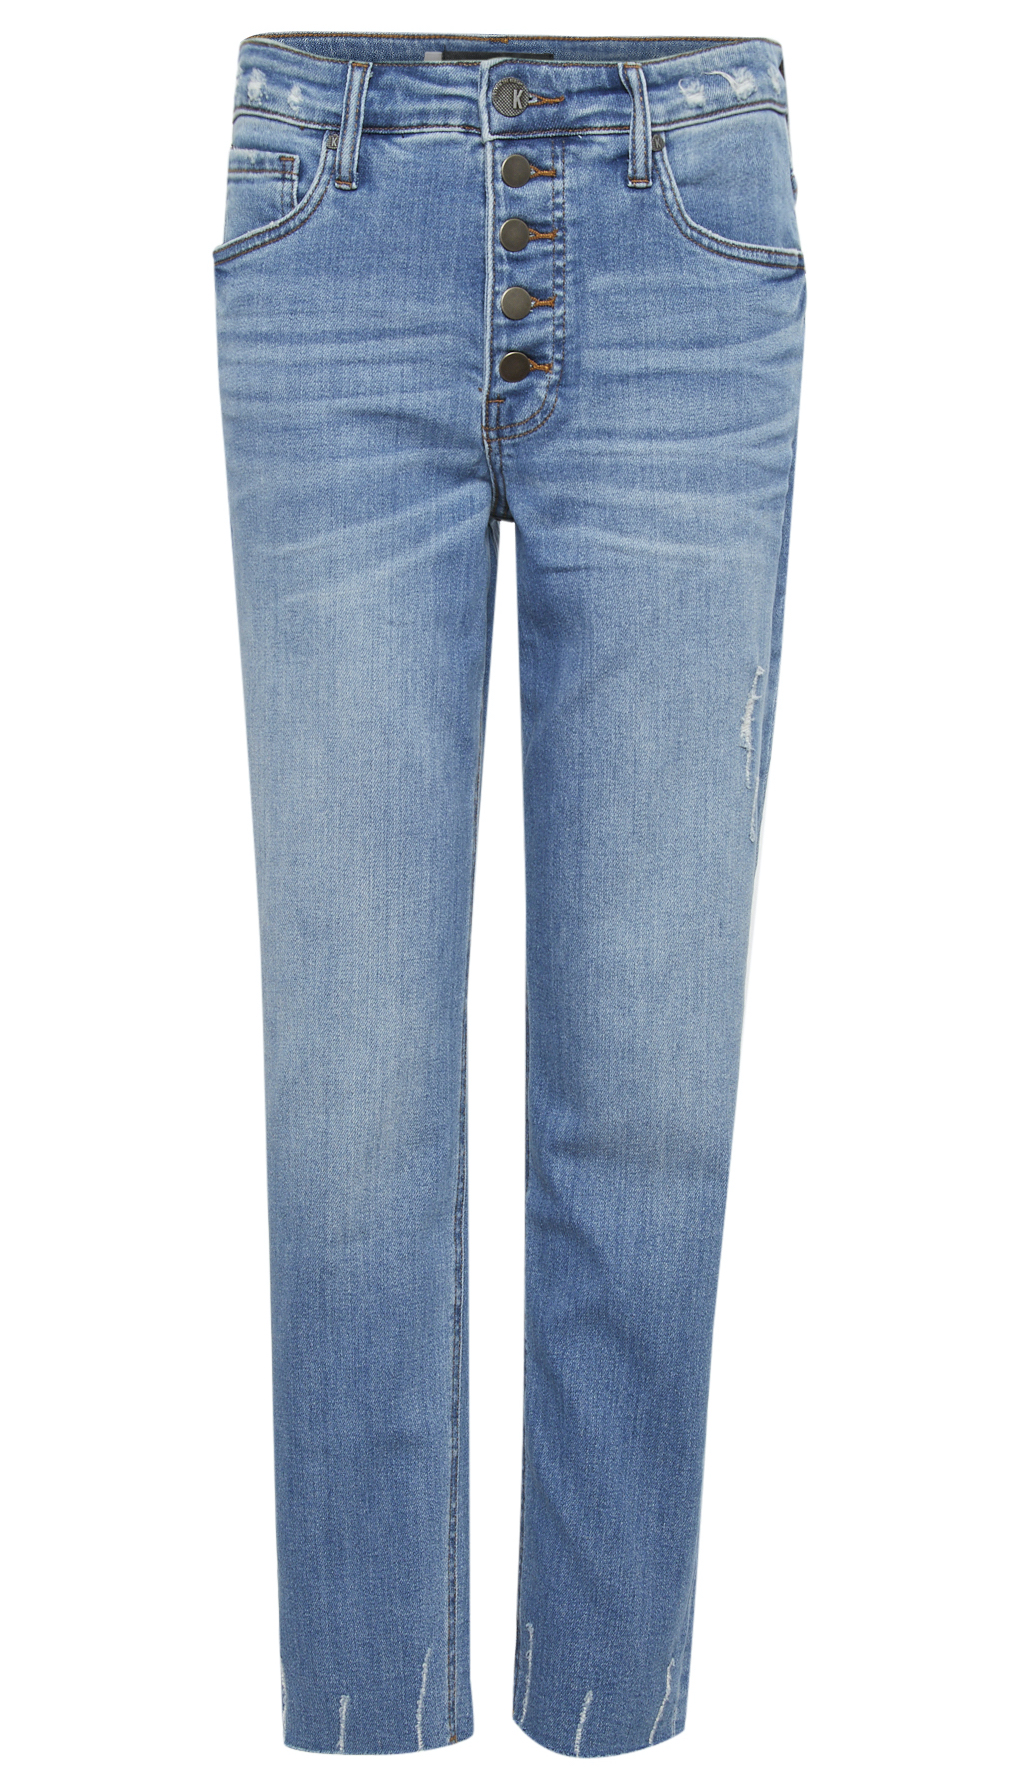 Kut from the Kloth High Rise Button Fly Mom Jeans